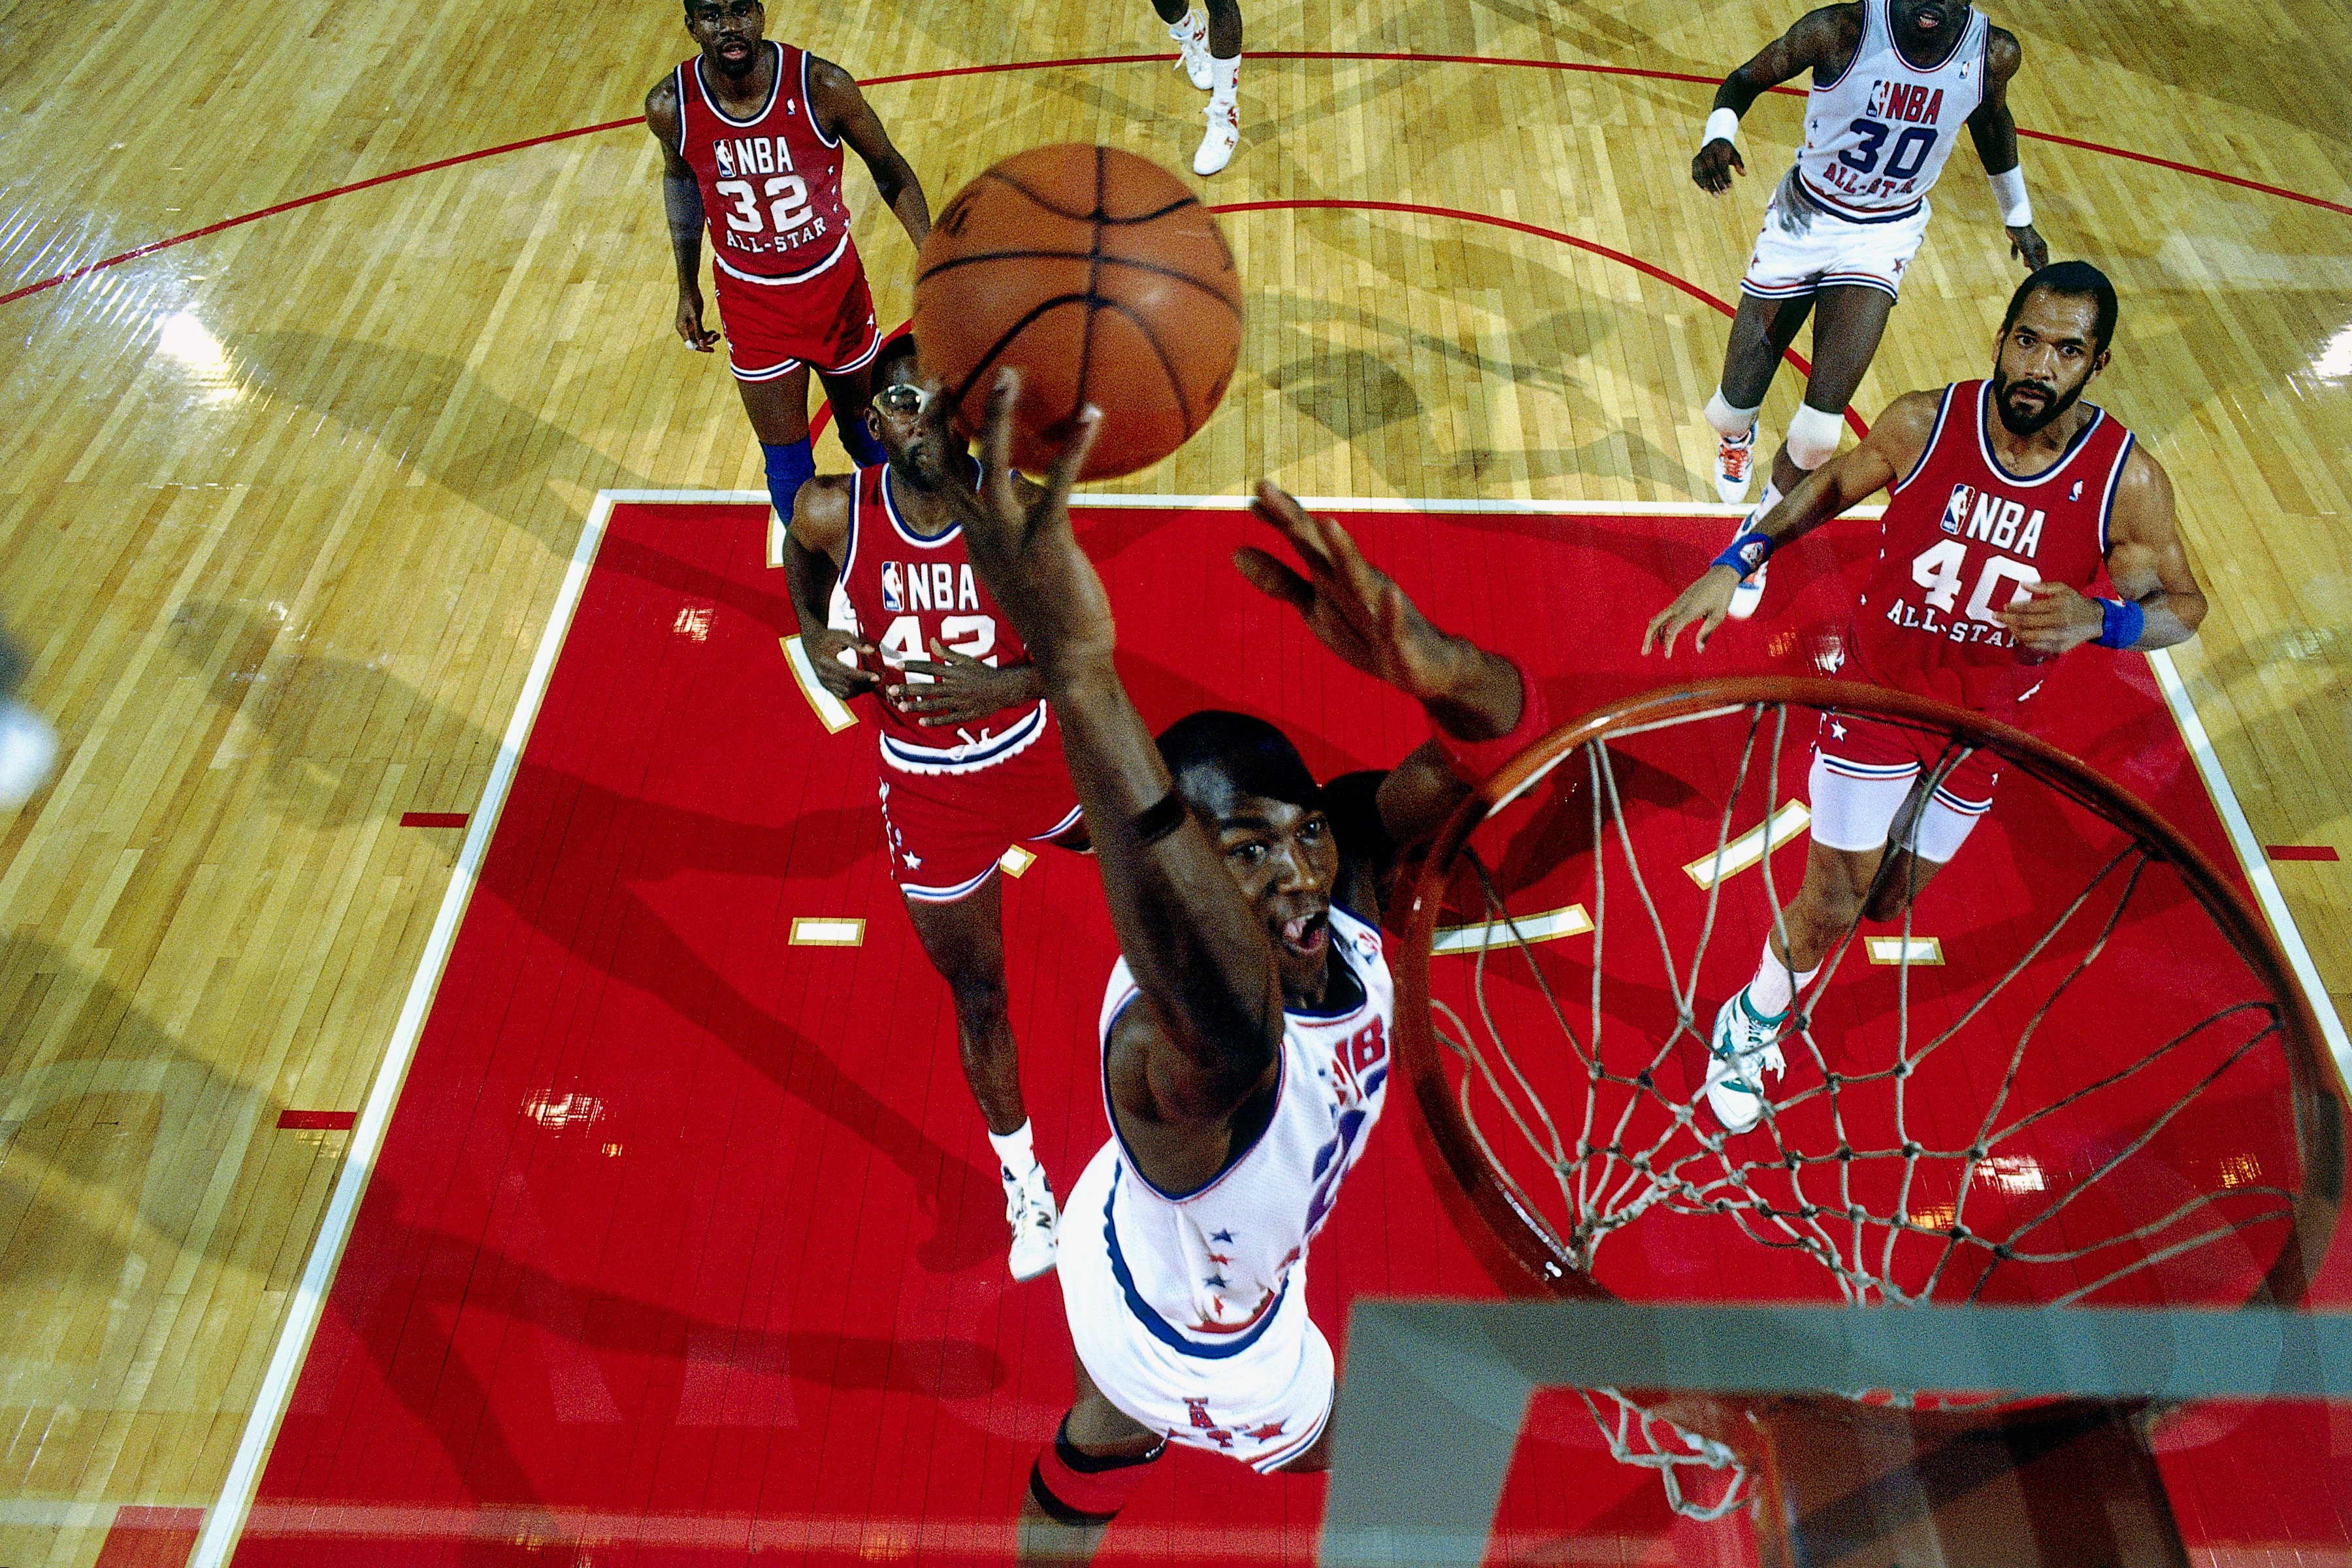 Michael Jordan of the Eastern Conference looks on during the 1988